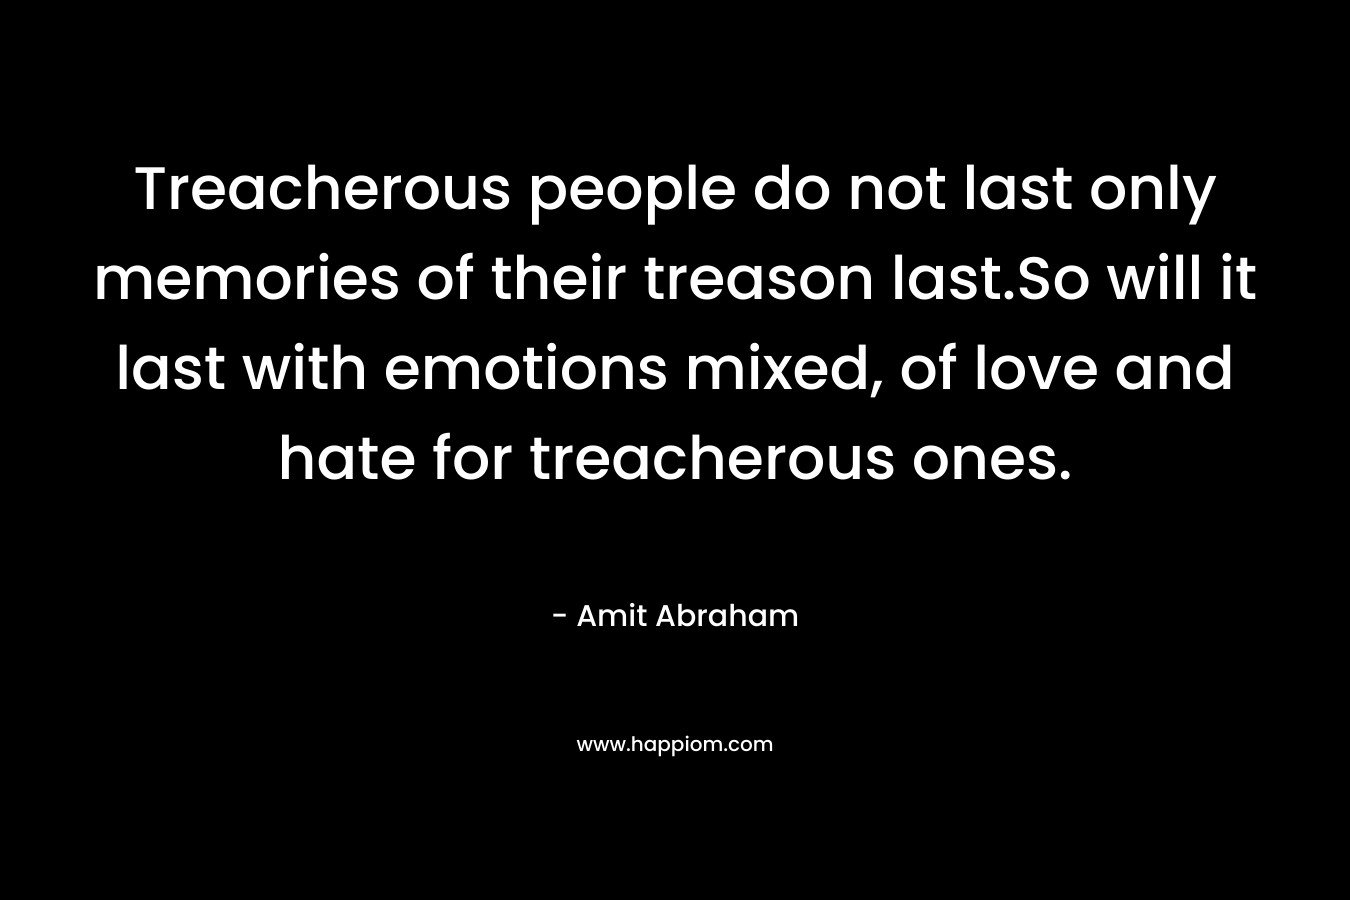 Treacherous people do not last only memories of their treason last.So will it last with emotions mixed, of love and hate for treacherous ones. – Amit Abraham